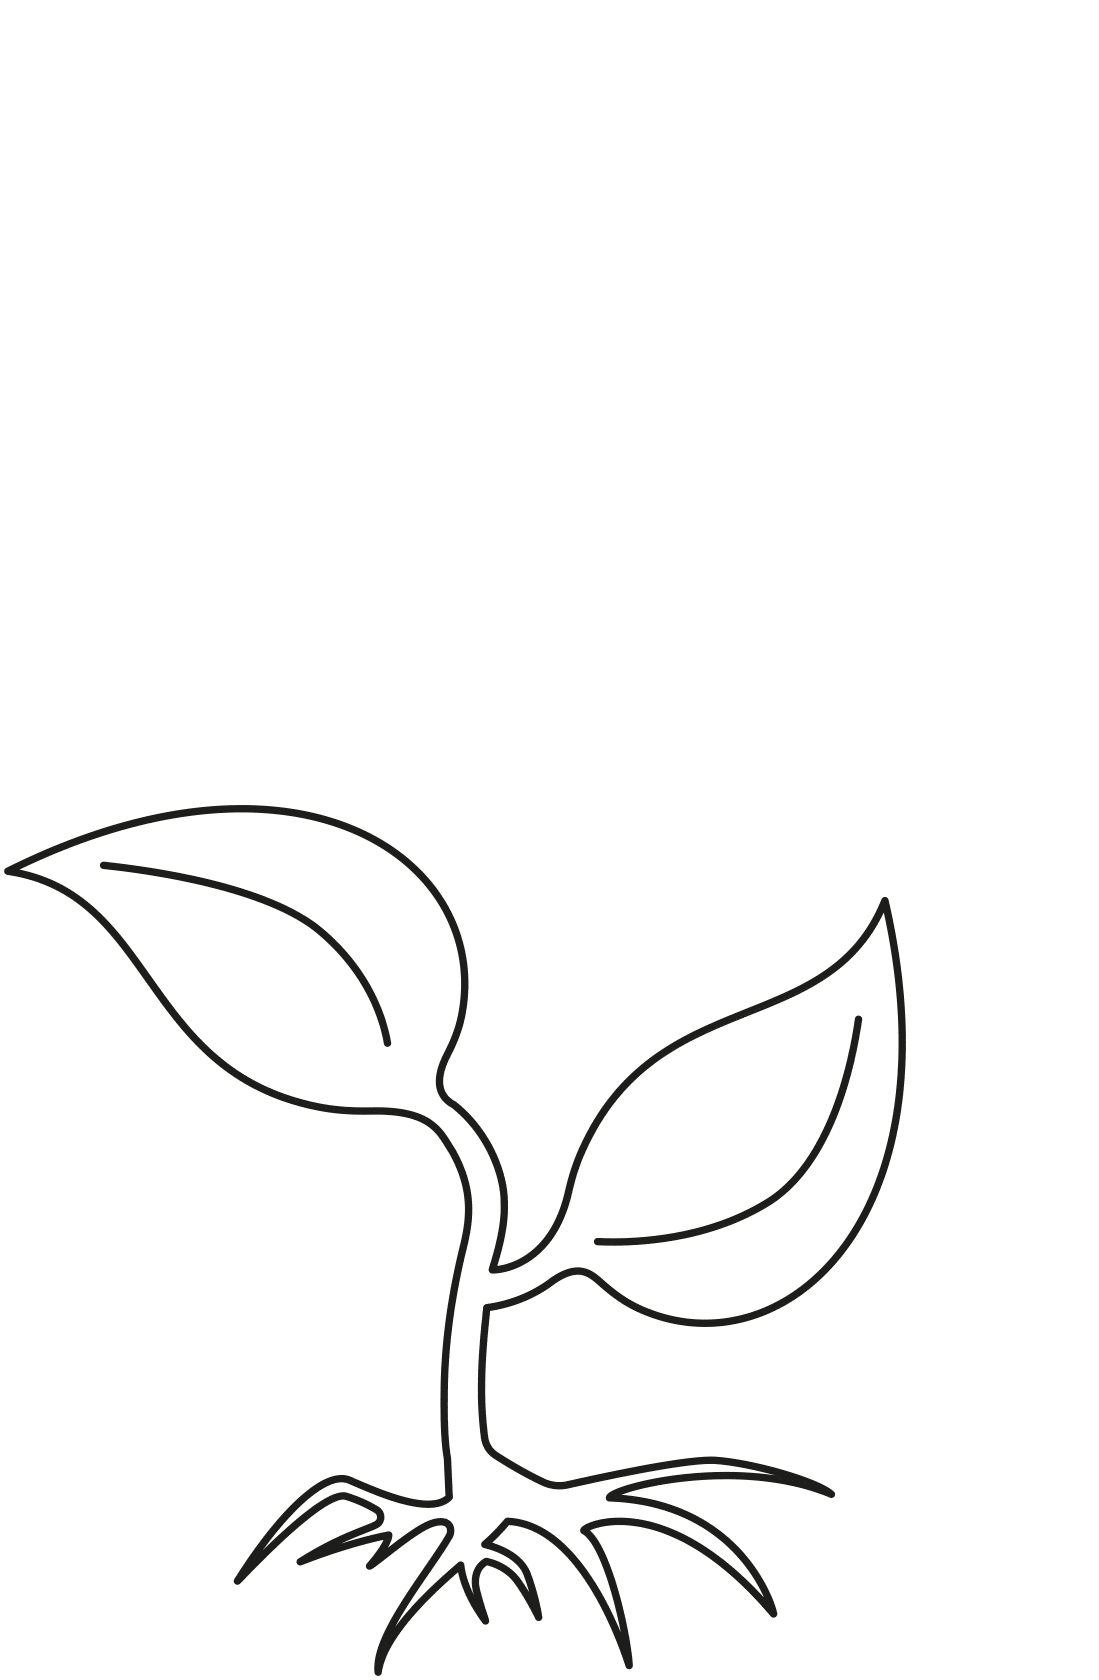 Gif of a growing sprout with root in a frame representing the solo-preneur sprout sole proprietorship